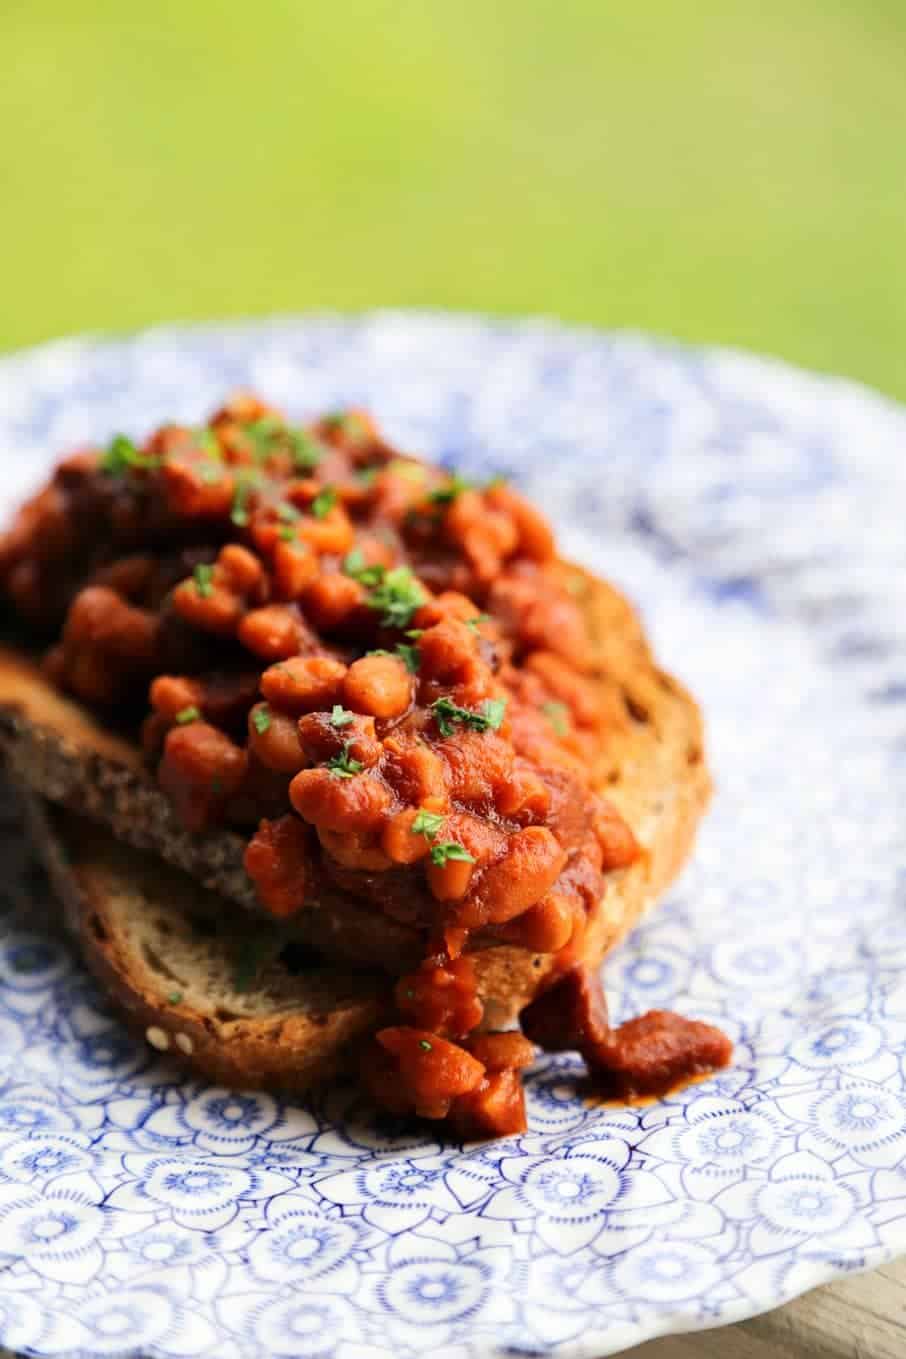 Slow Cooker Baked Beans - The Magical Slow Cooker